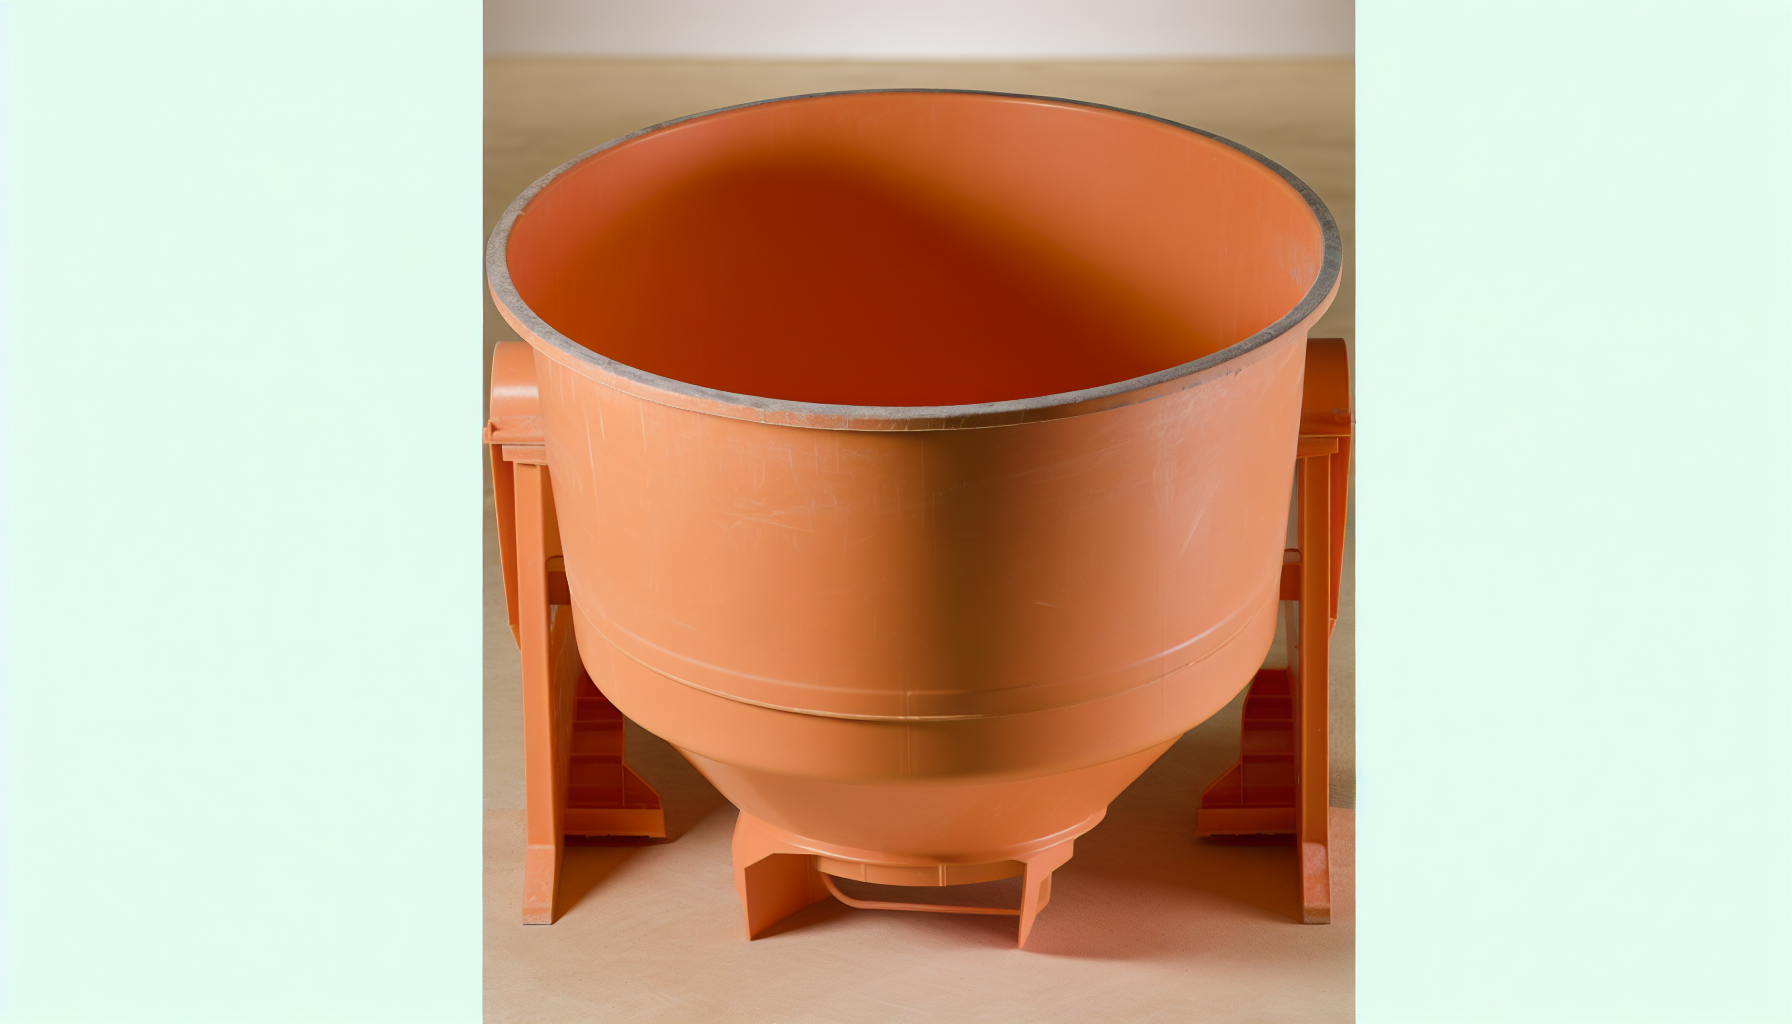 A durable cement mixer tub made of heavy-duty plastic material